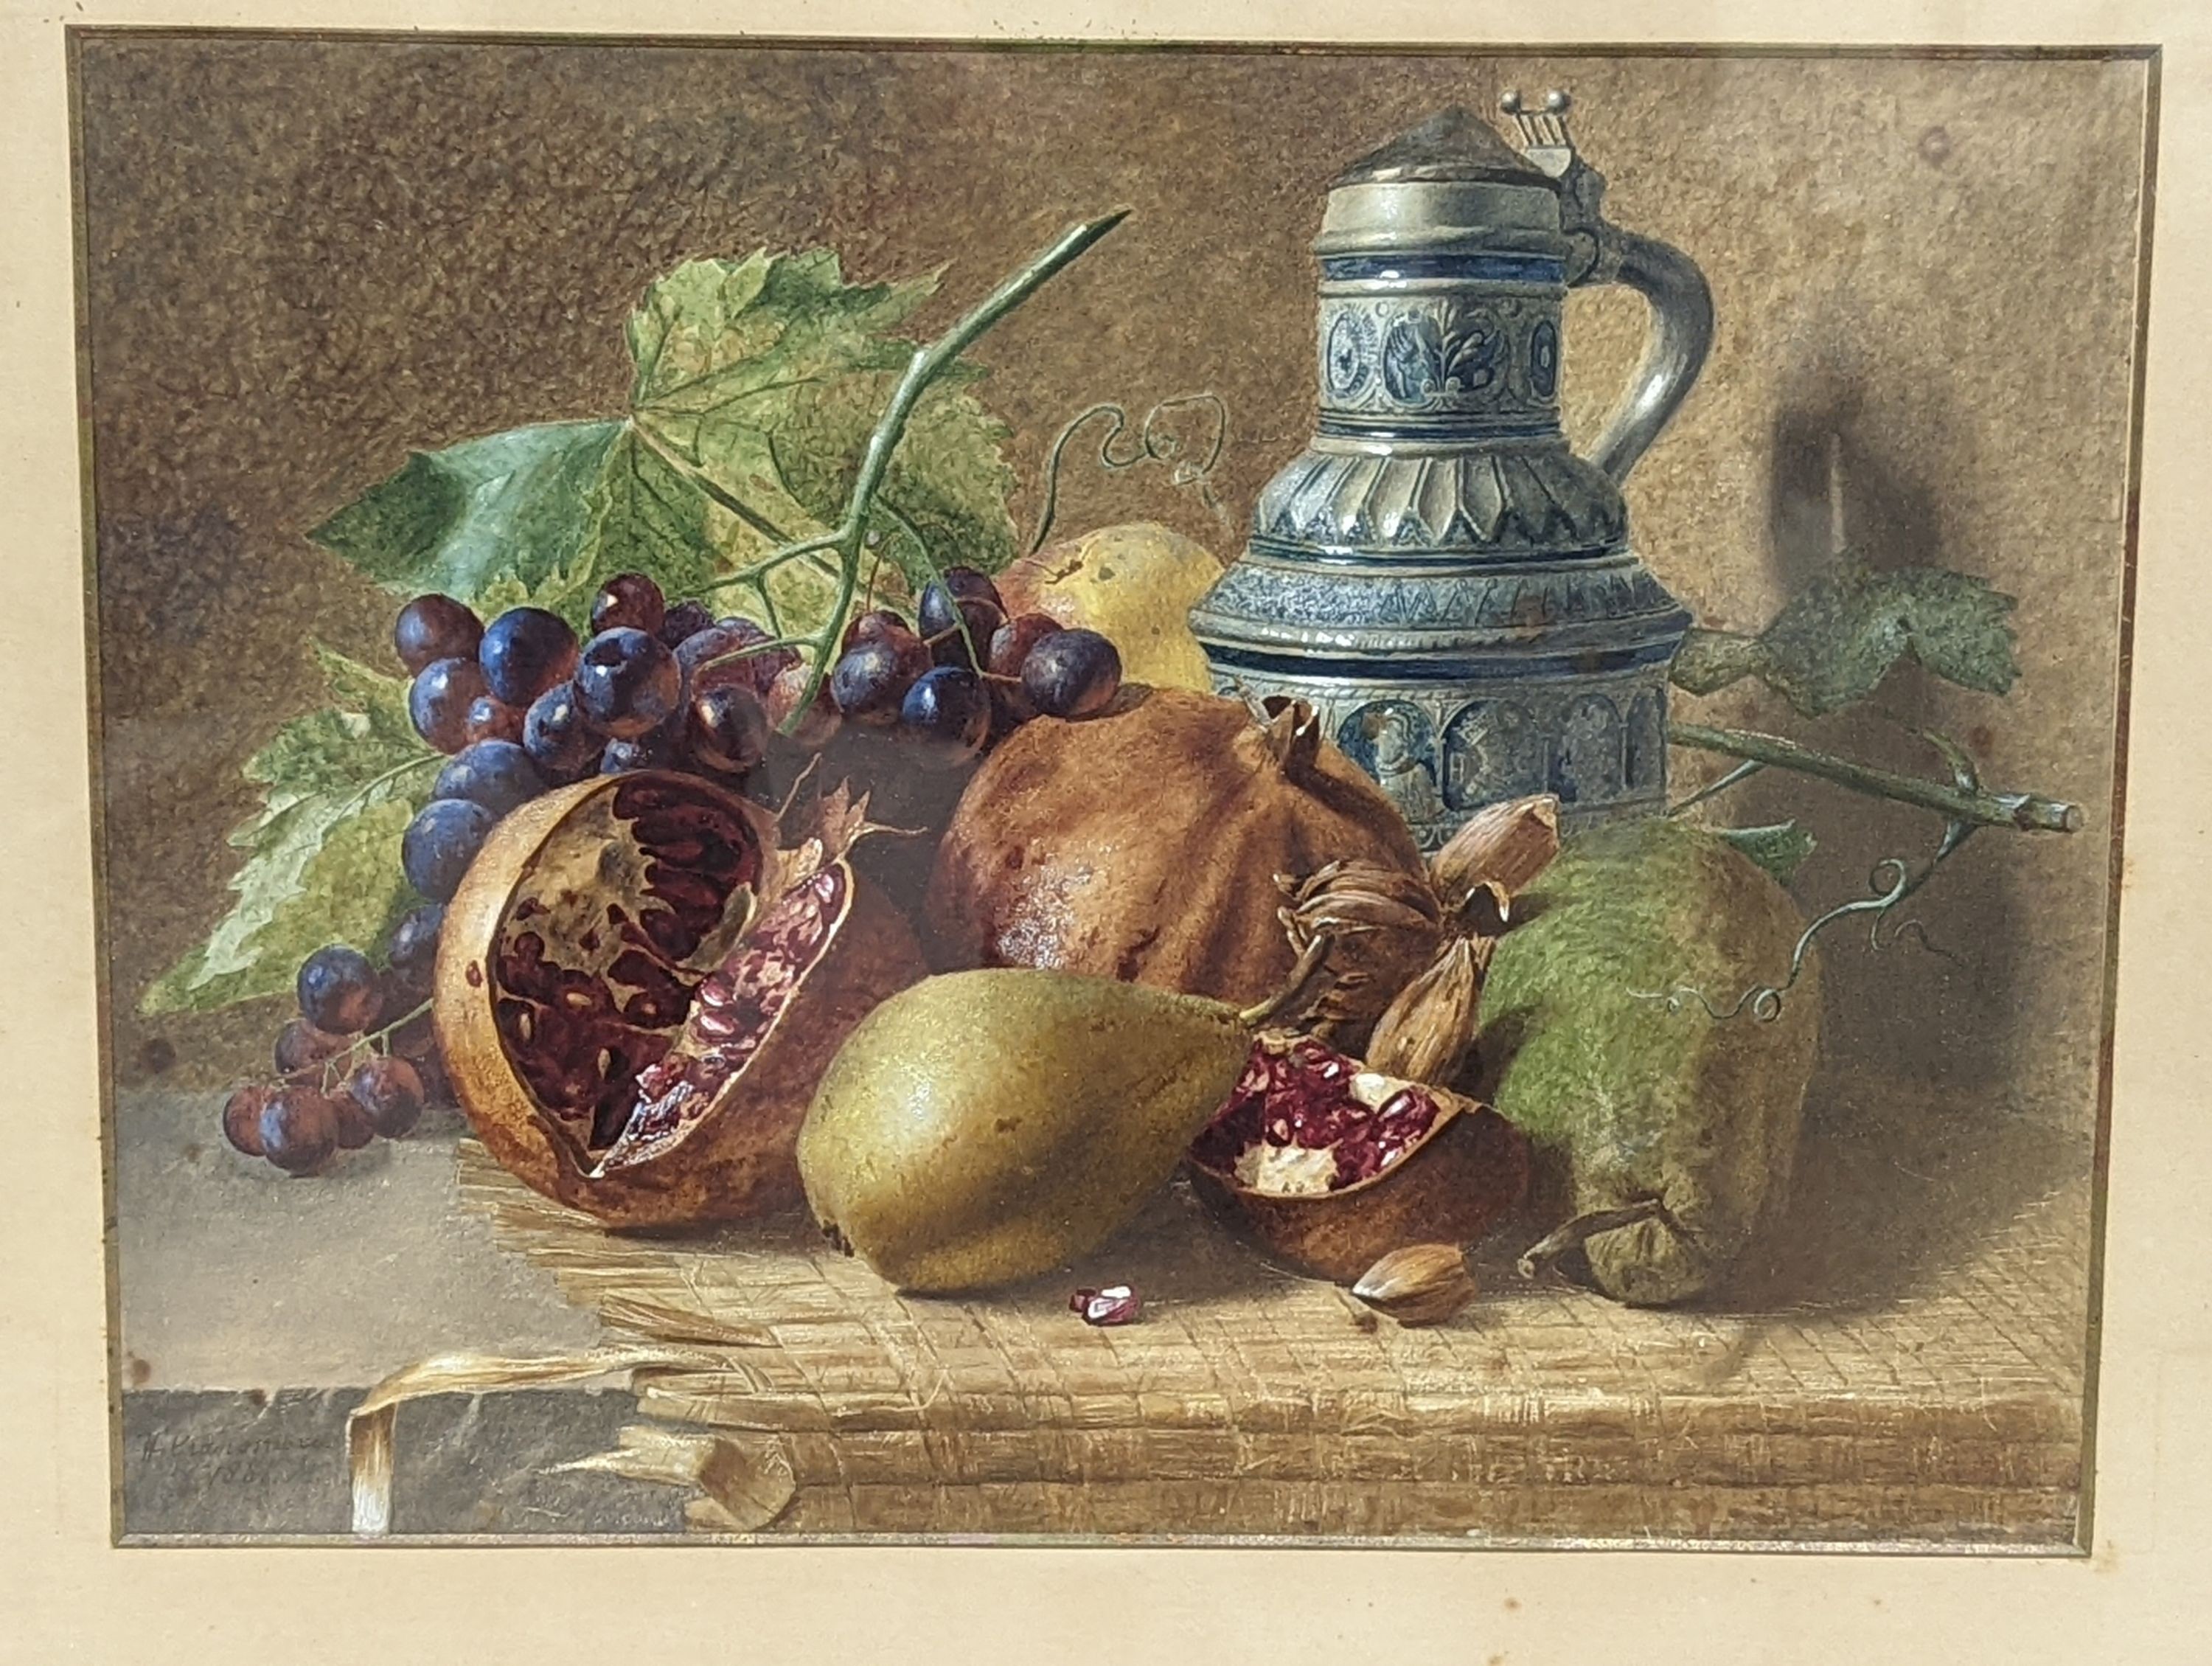 W. Clansmore (?), watercolour and gouache, still life, signed and dated 1861, 32 x 43cm